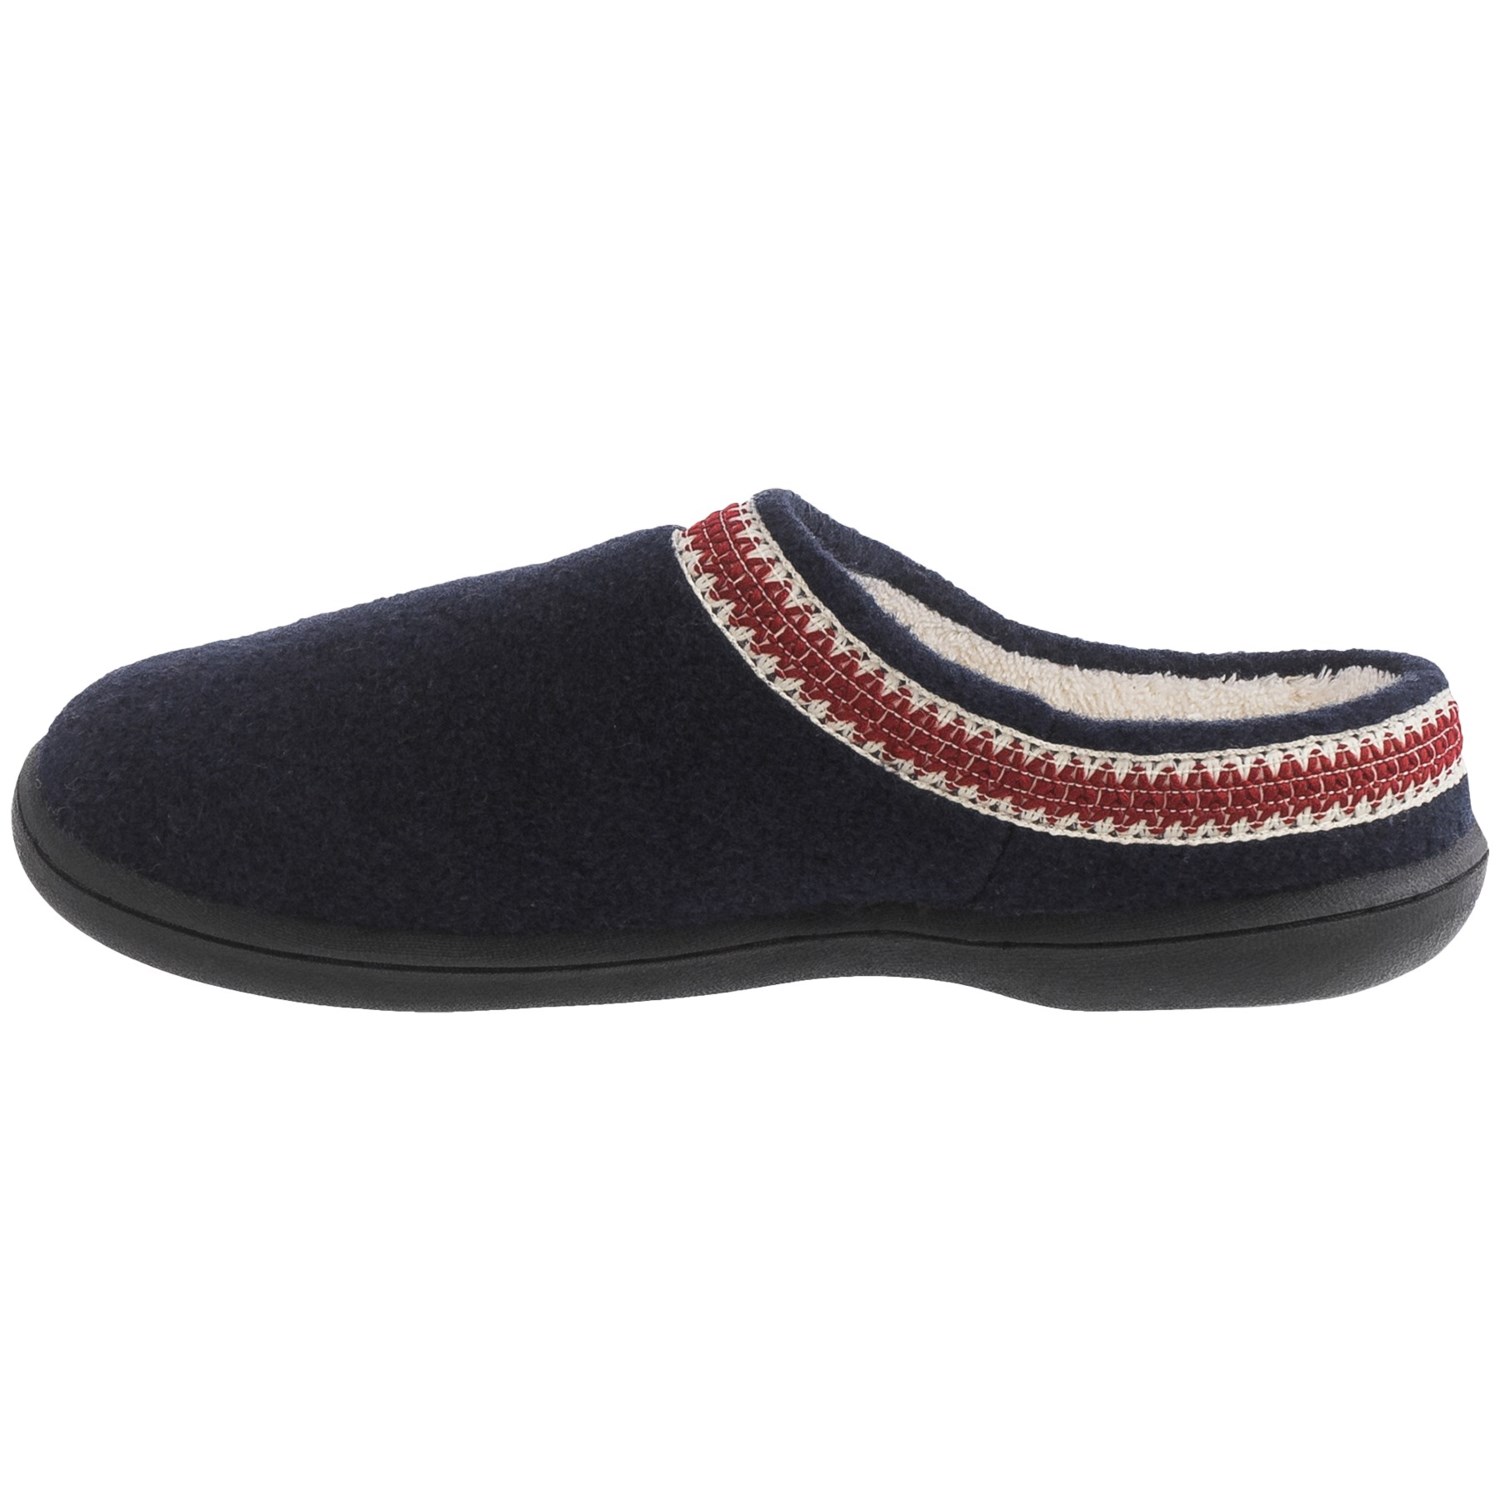 Clarks Stitched Clog Slippers (For Women) - Save 50%